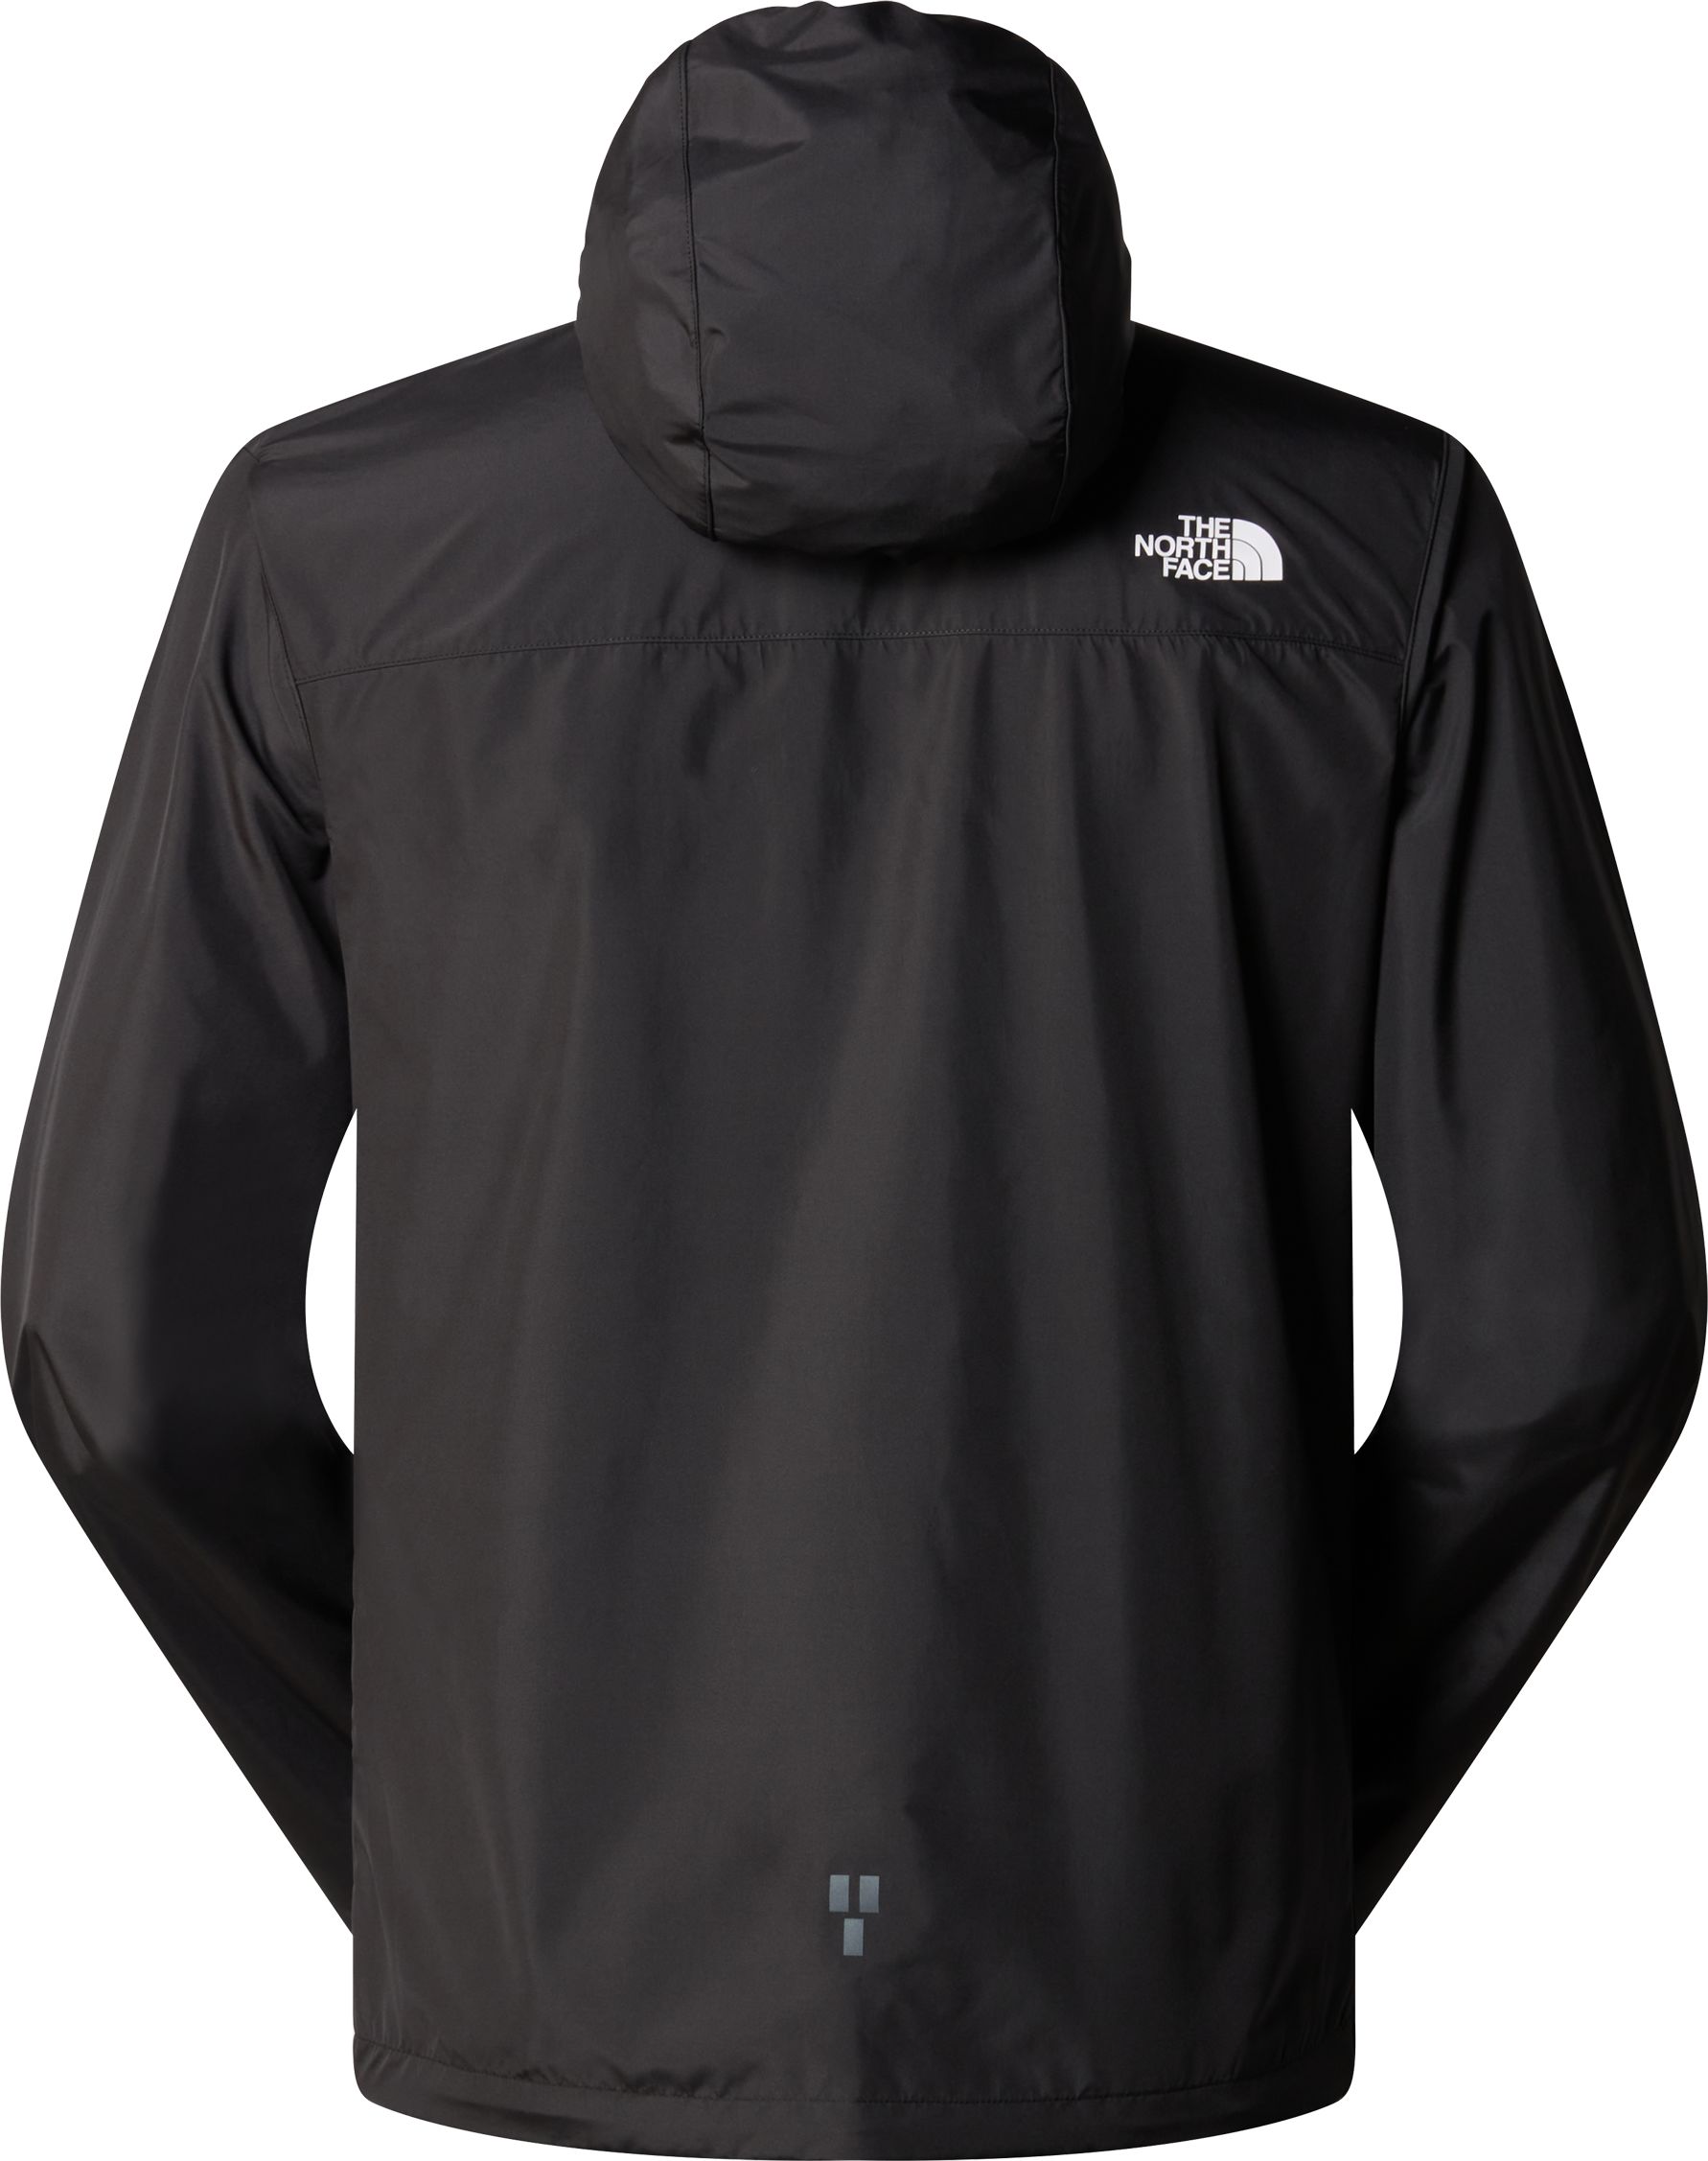 THE NORTH FACE, M HIGHER RUN WIND JACKET